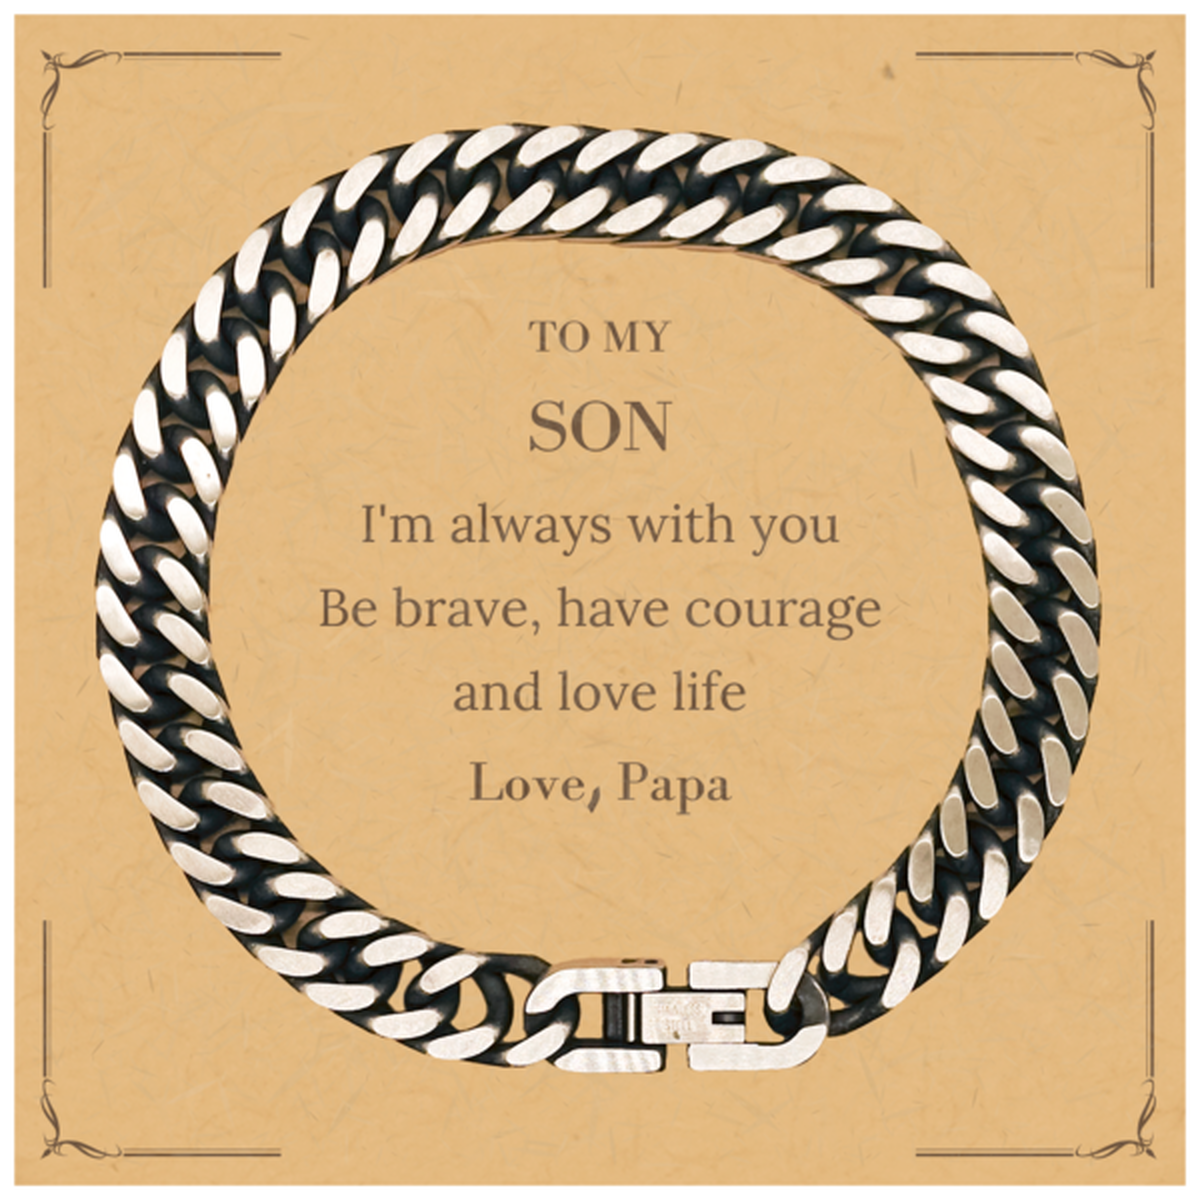 To My Son Gifts from Papa, Unique Cuban Link Chain Bracelet Inspirational Christmas Birthday Graduation Gifts for Son I'm always with you. Be brave, have courage and love life. Love, Papa